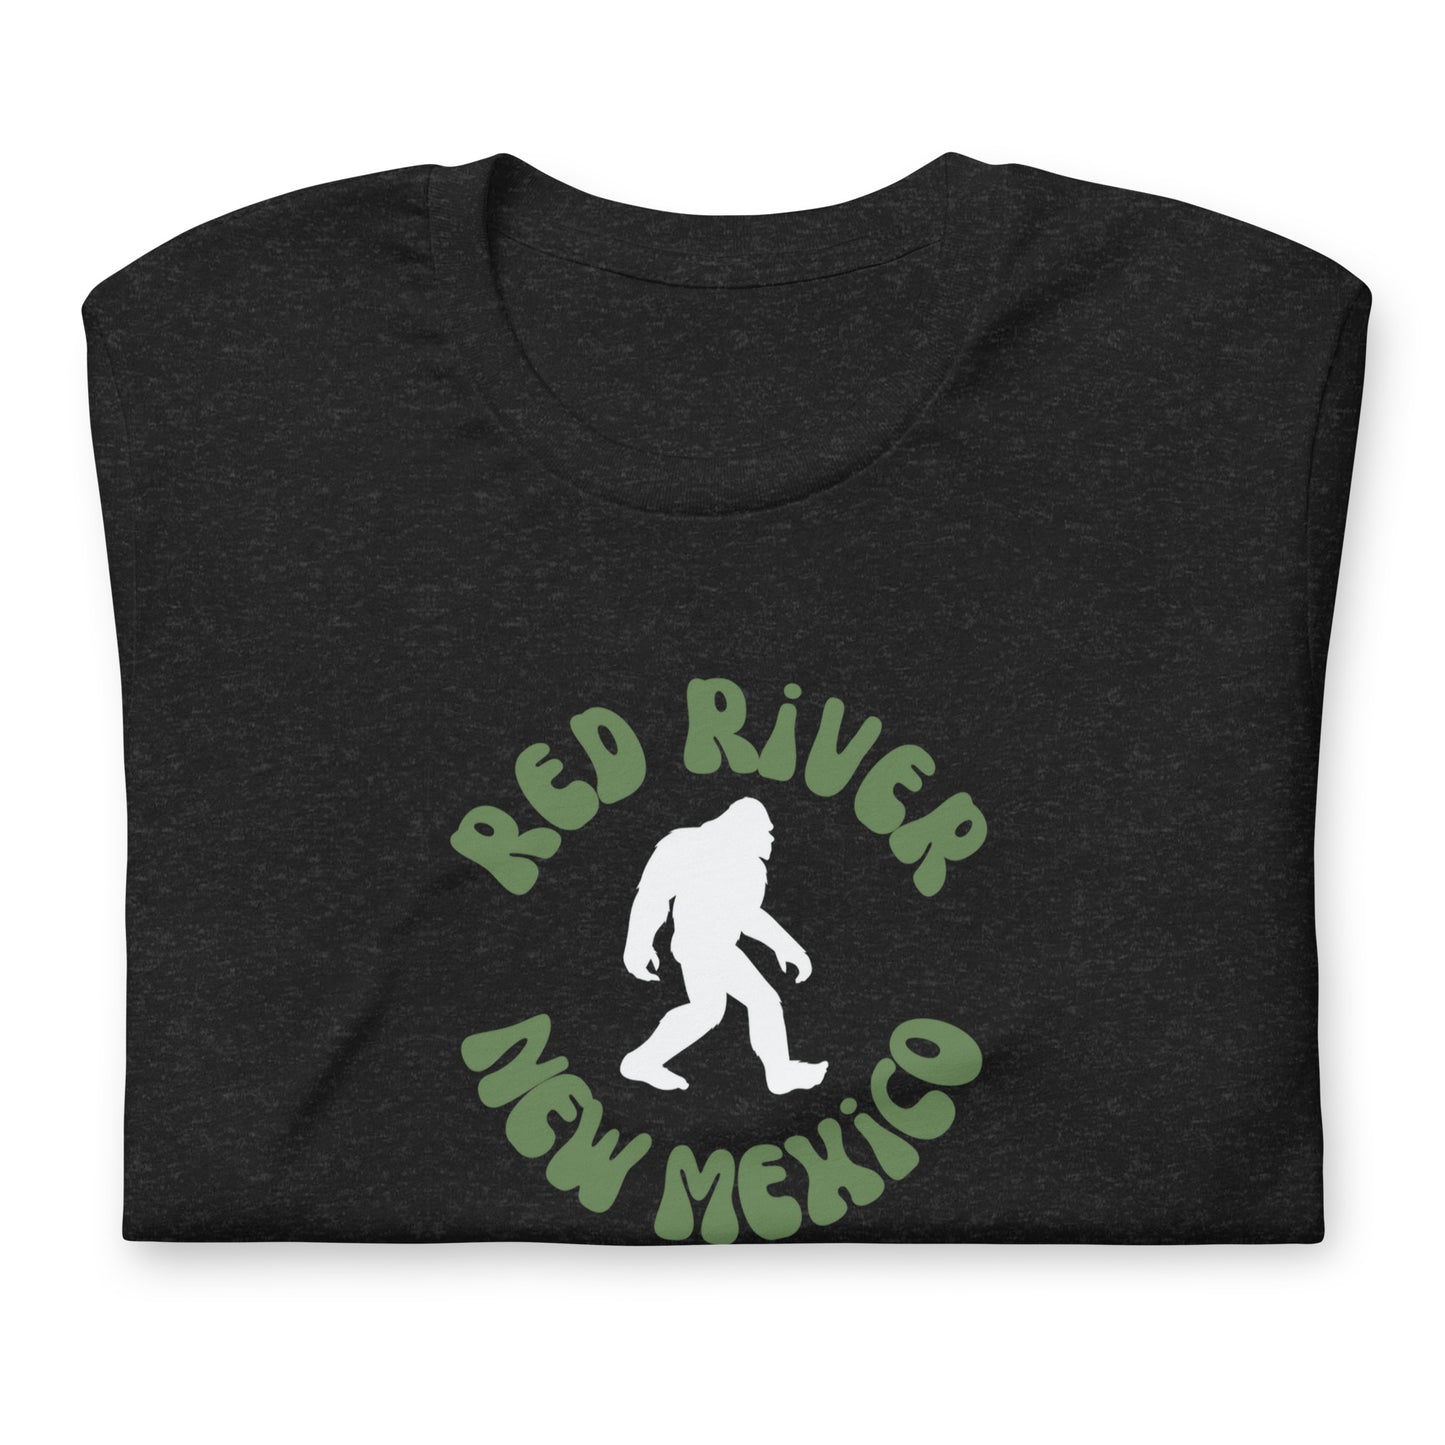 The Red River, New Mexico Yeti Unisex T-shirt